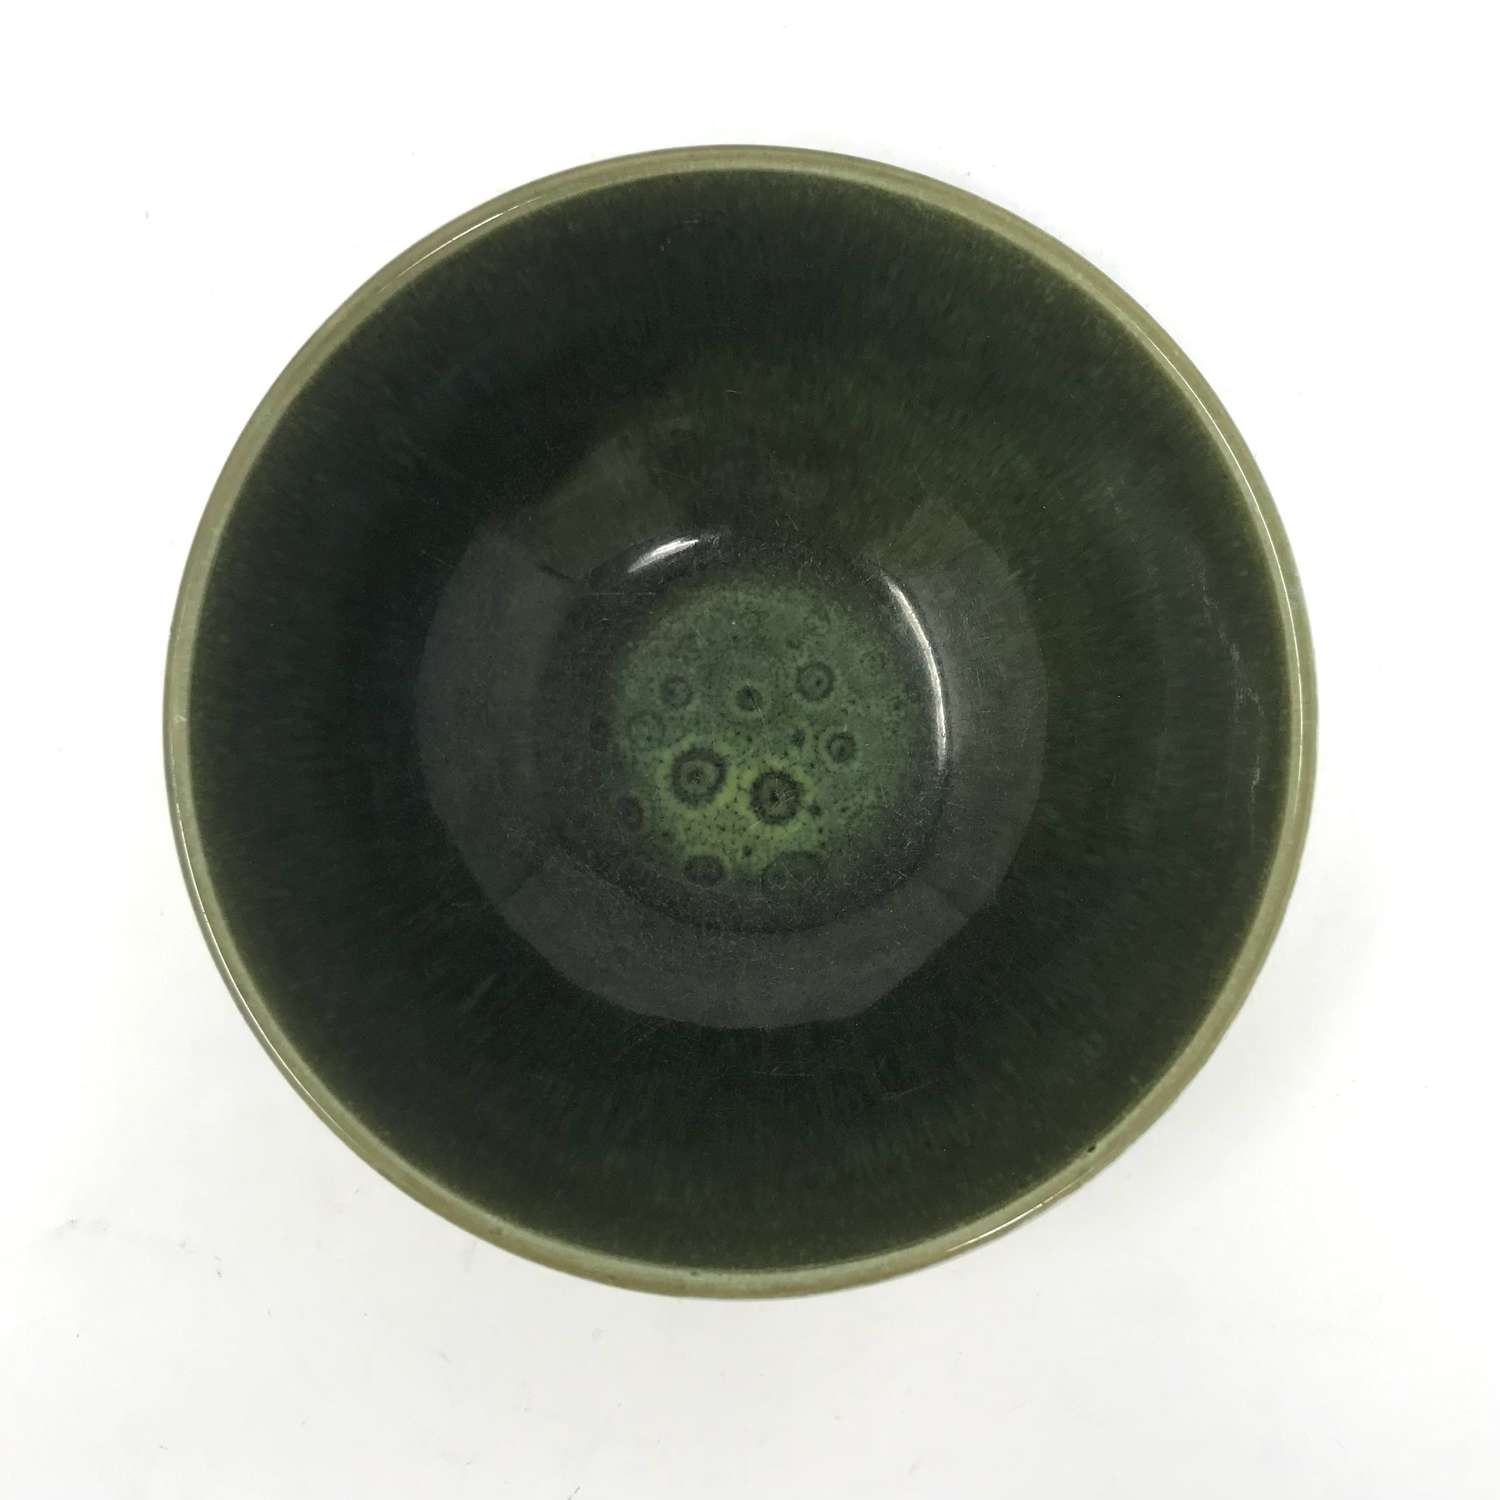 Poole Pottery Studio bowl with green interior 1960s.